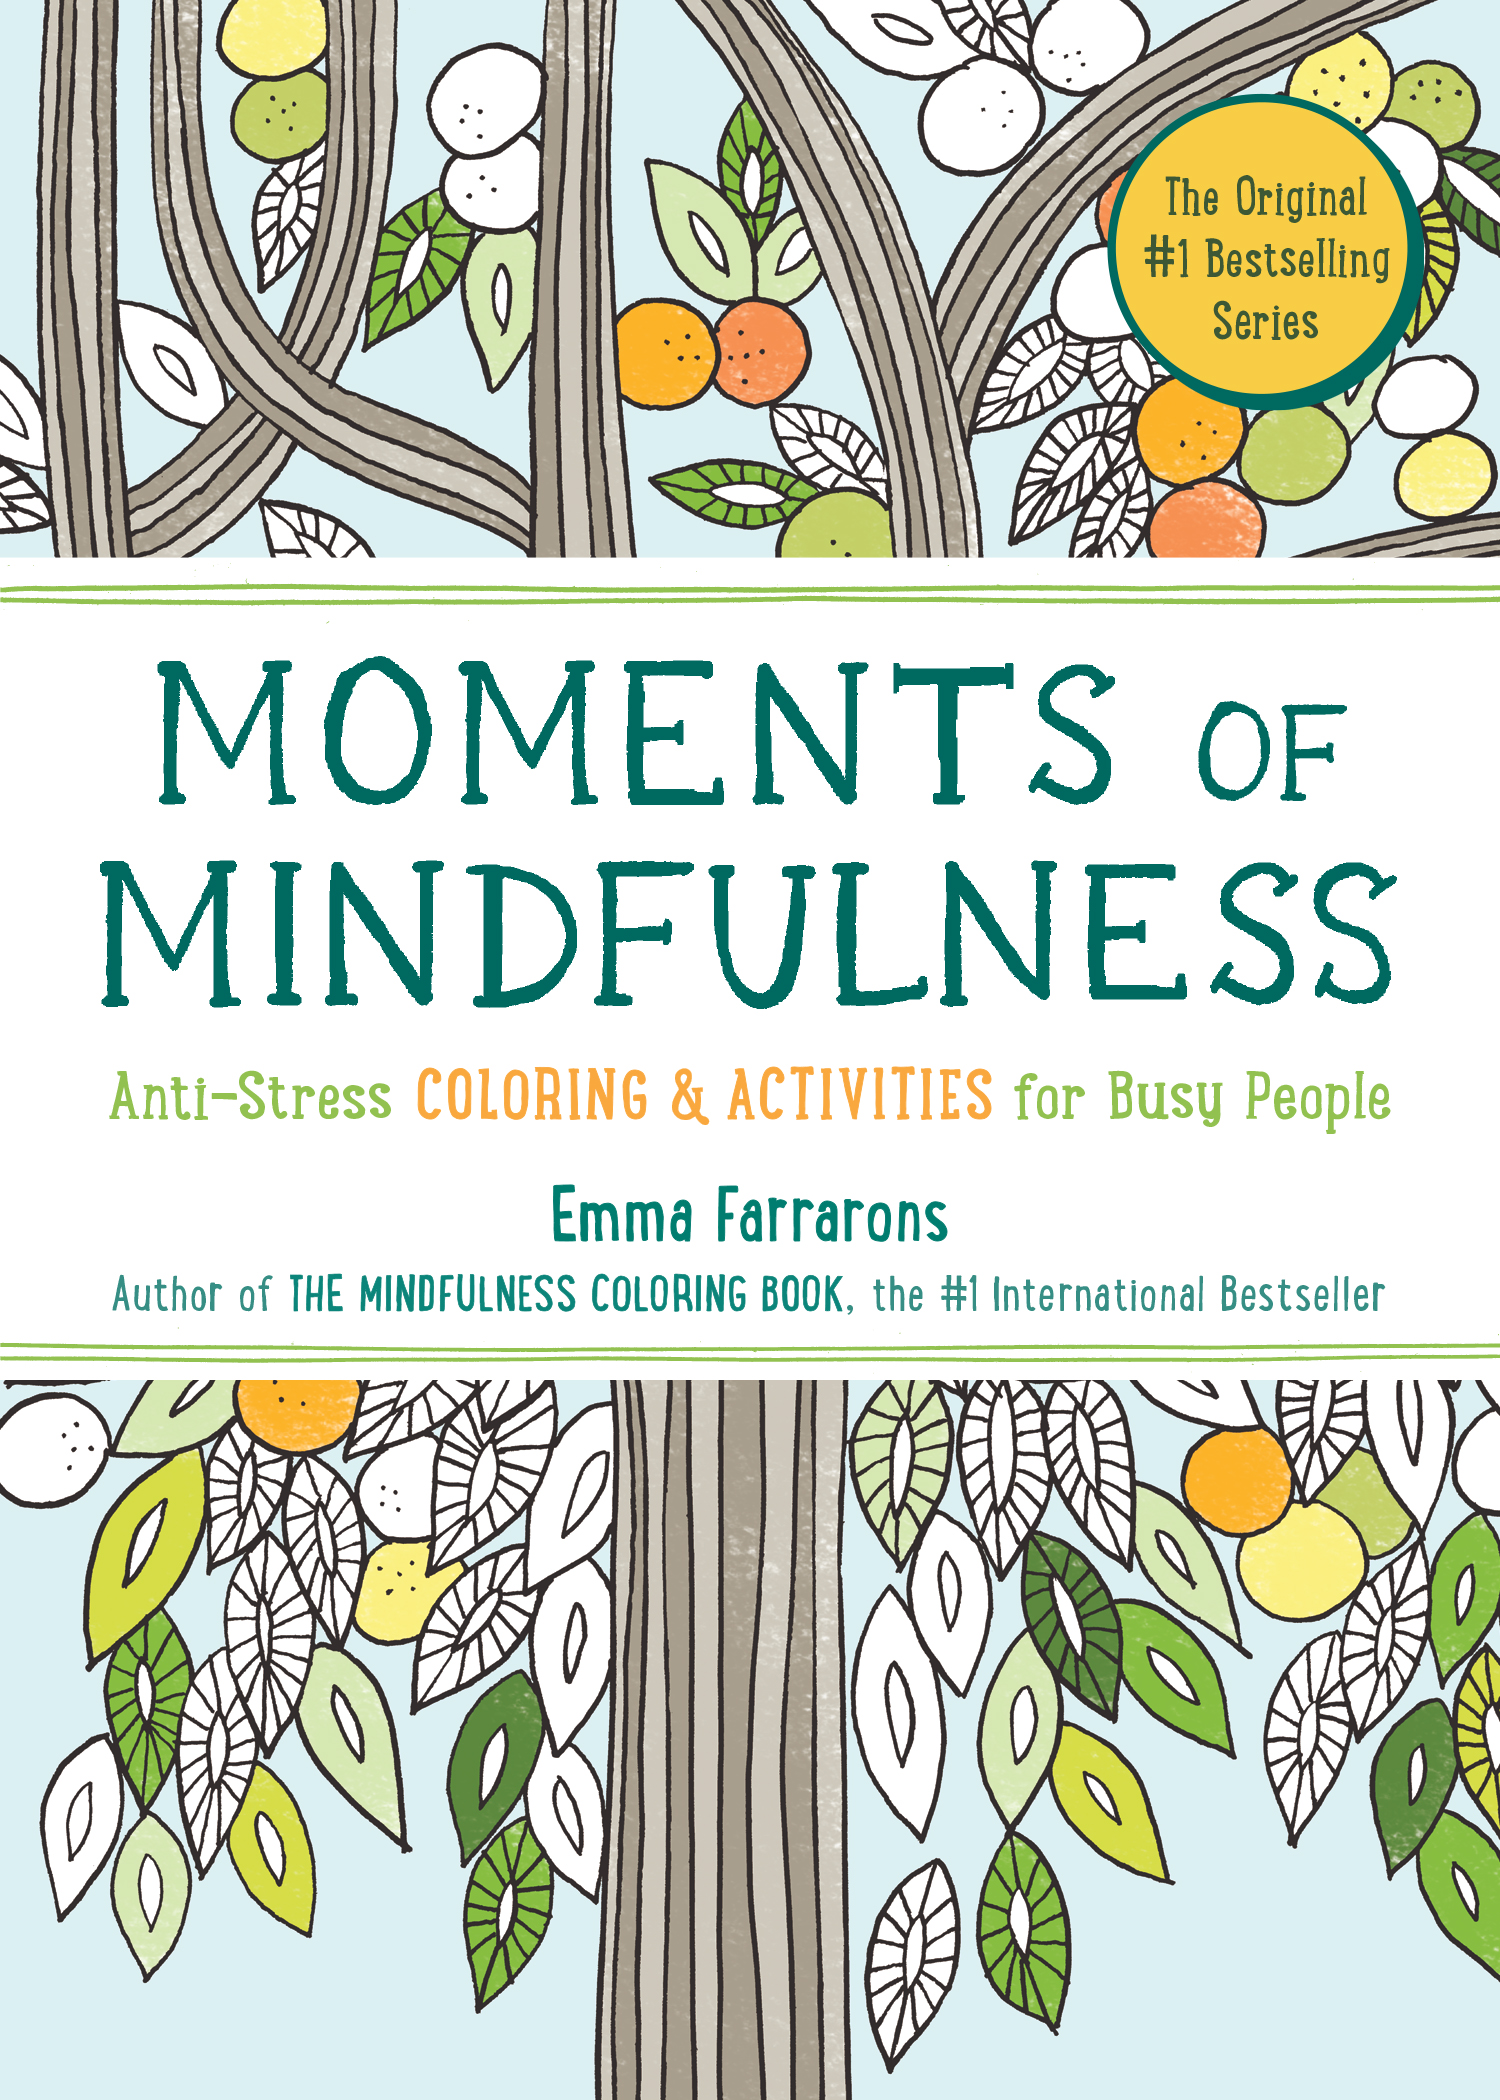 Mindfulness Coloring Book For Adults: For Mindful People